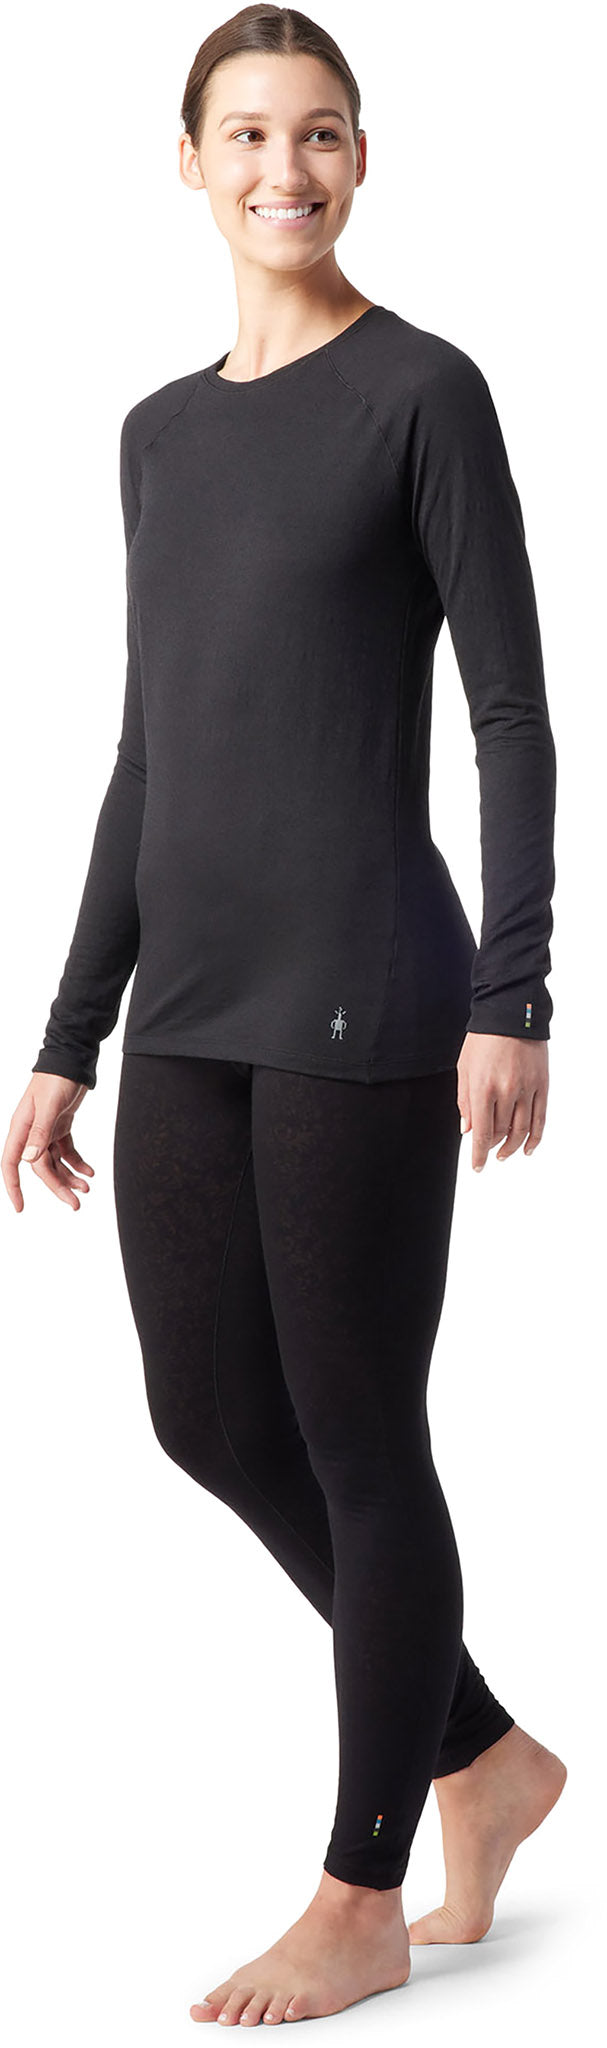 Smartwool Classic All-Season (150) Merino Lace Base Layer LS - Womens, FREE SHIPPING in Canada